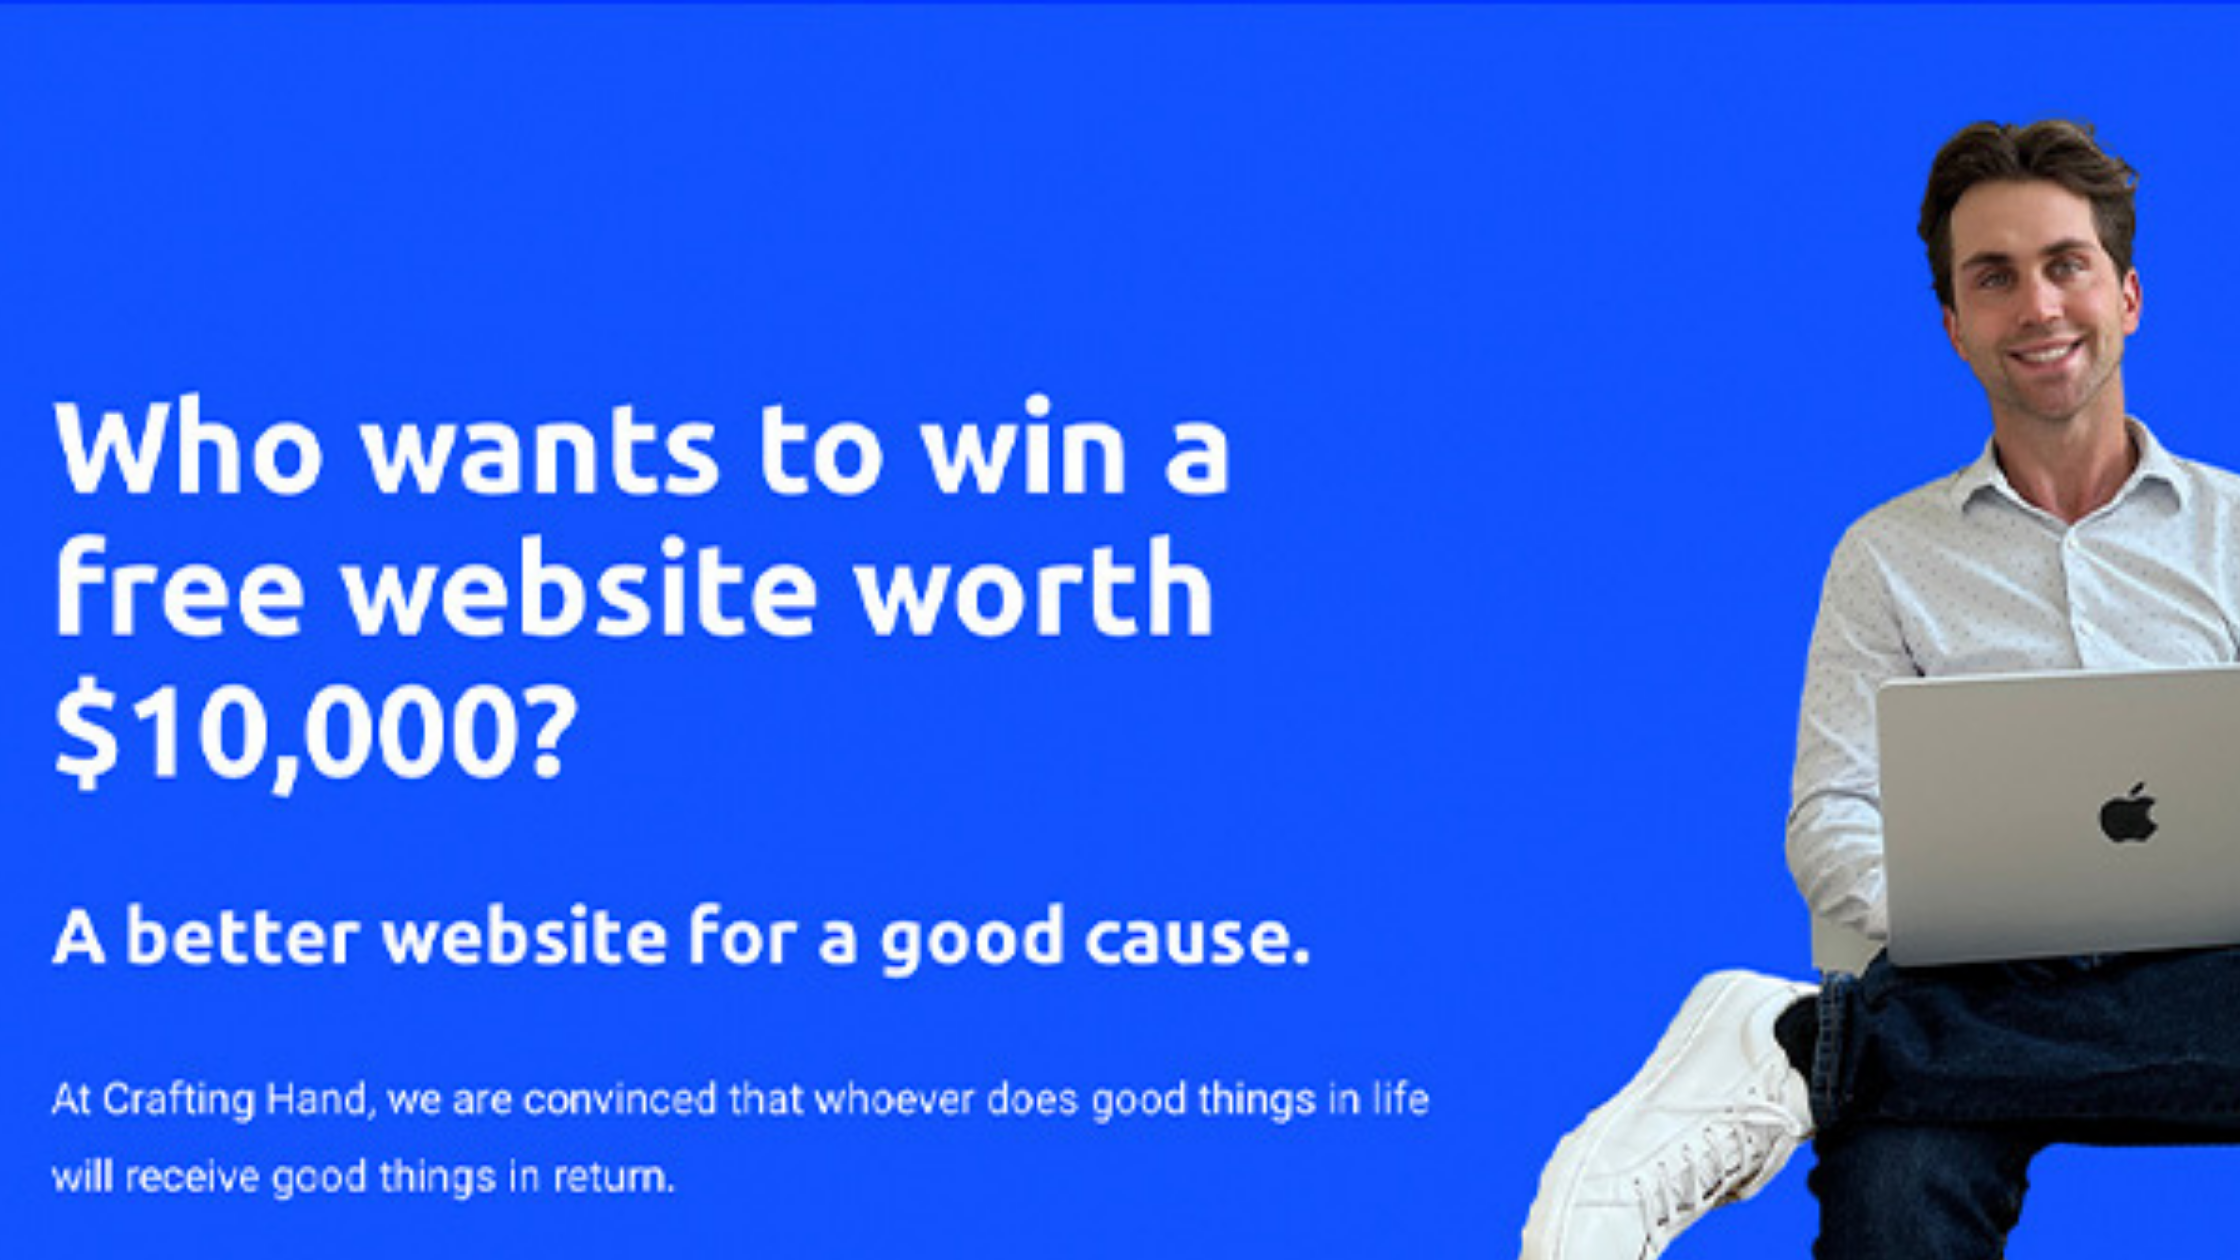 Who wants to win a free website worth $10,000?